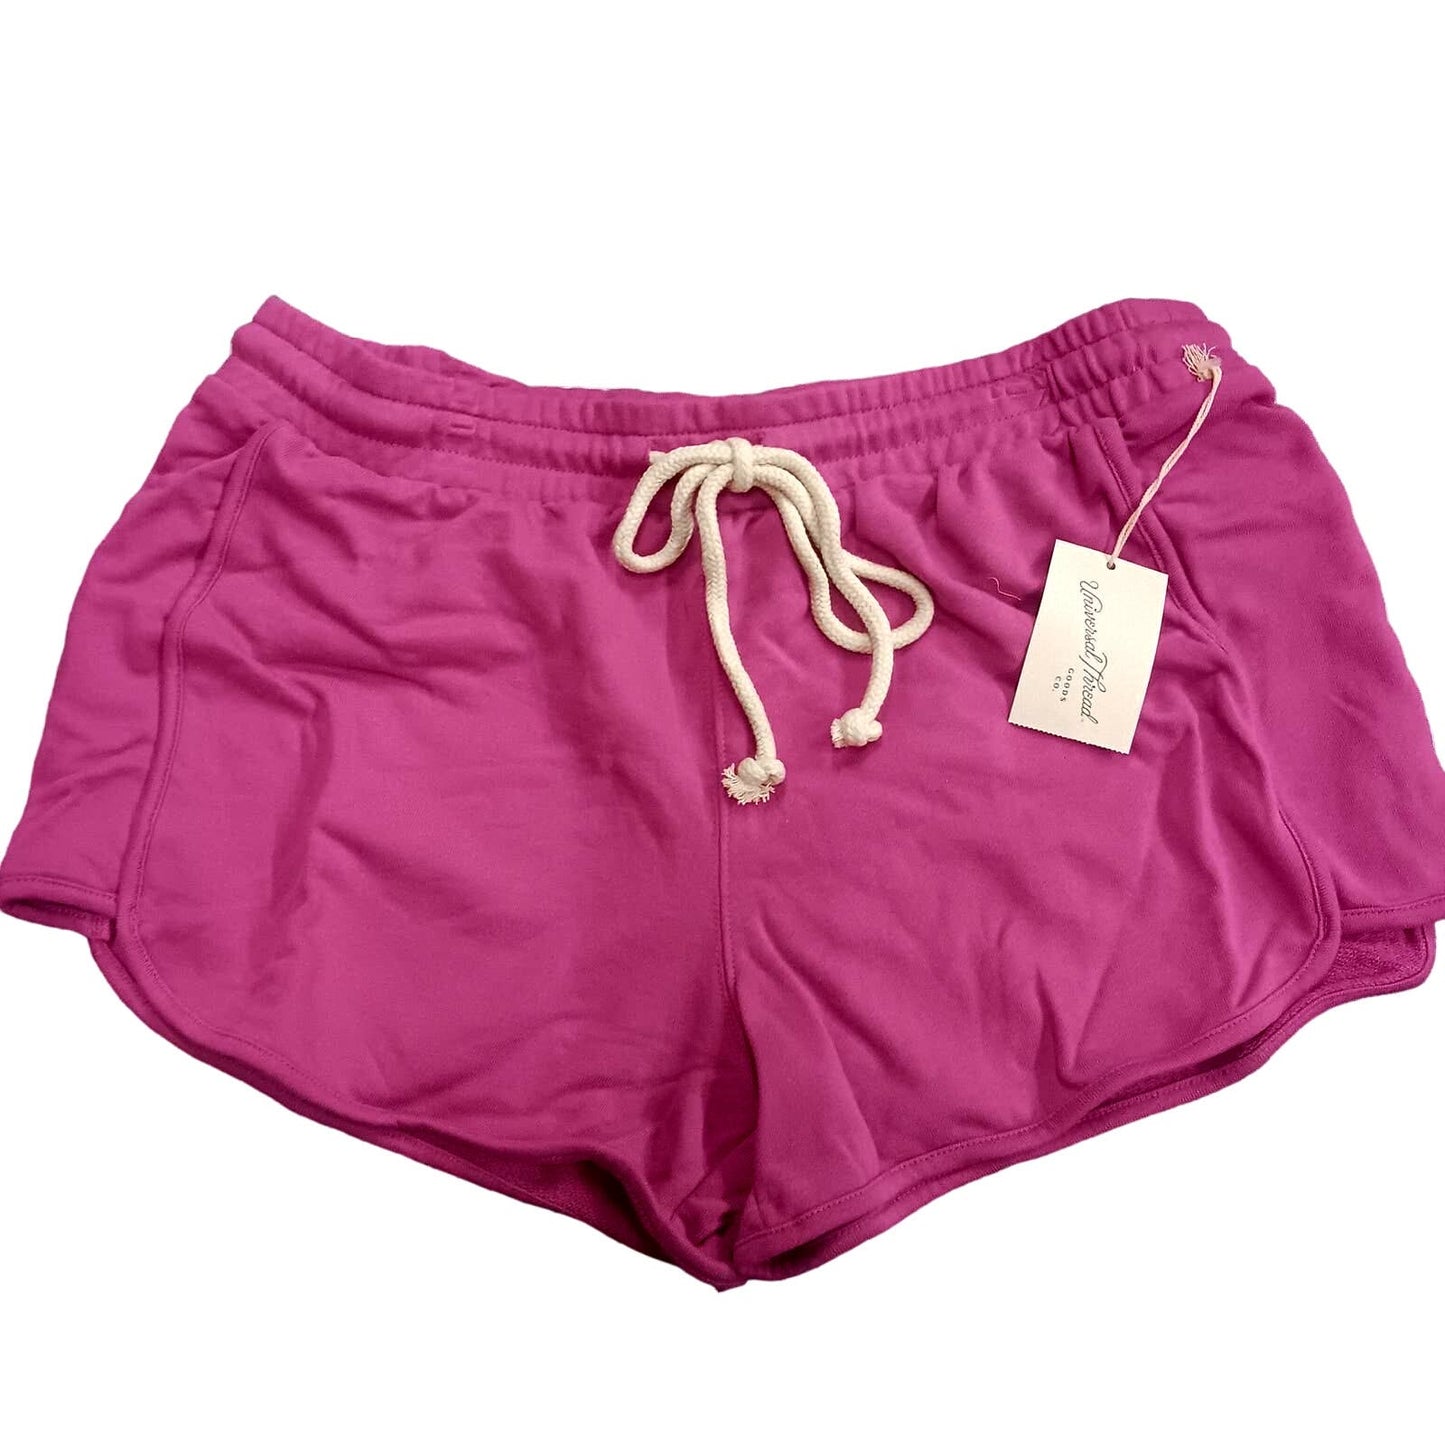 Universal Thread Women's Mid-Rise French Terry Pull-On Shorts - Large, Pink